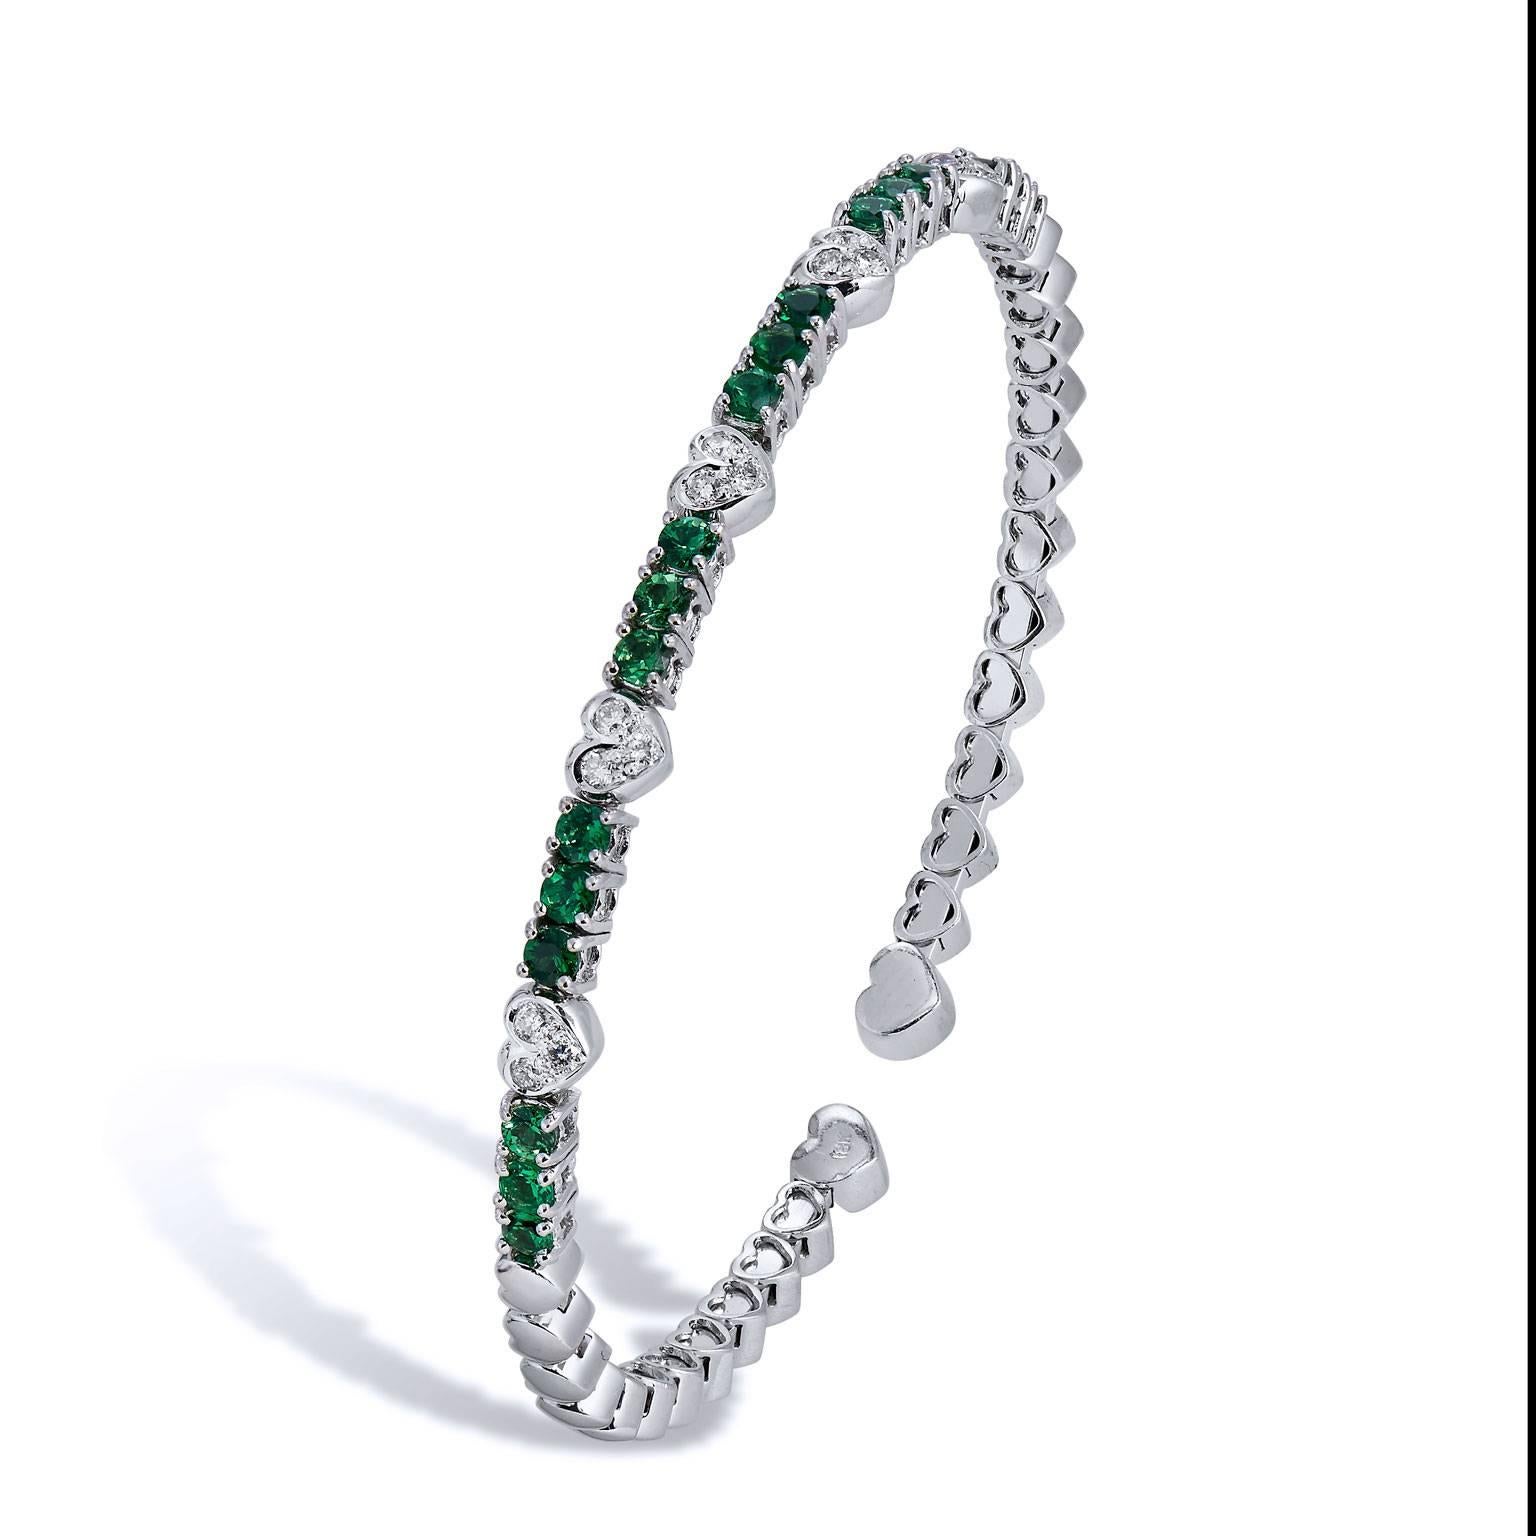 Enjoy this previously loved 18 karat white gold bracelet featuring eighteen pieces of green tsavorite and 0.22 carat of pave set diamond (F/G/SI1). Let a little green envy inspire your style.